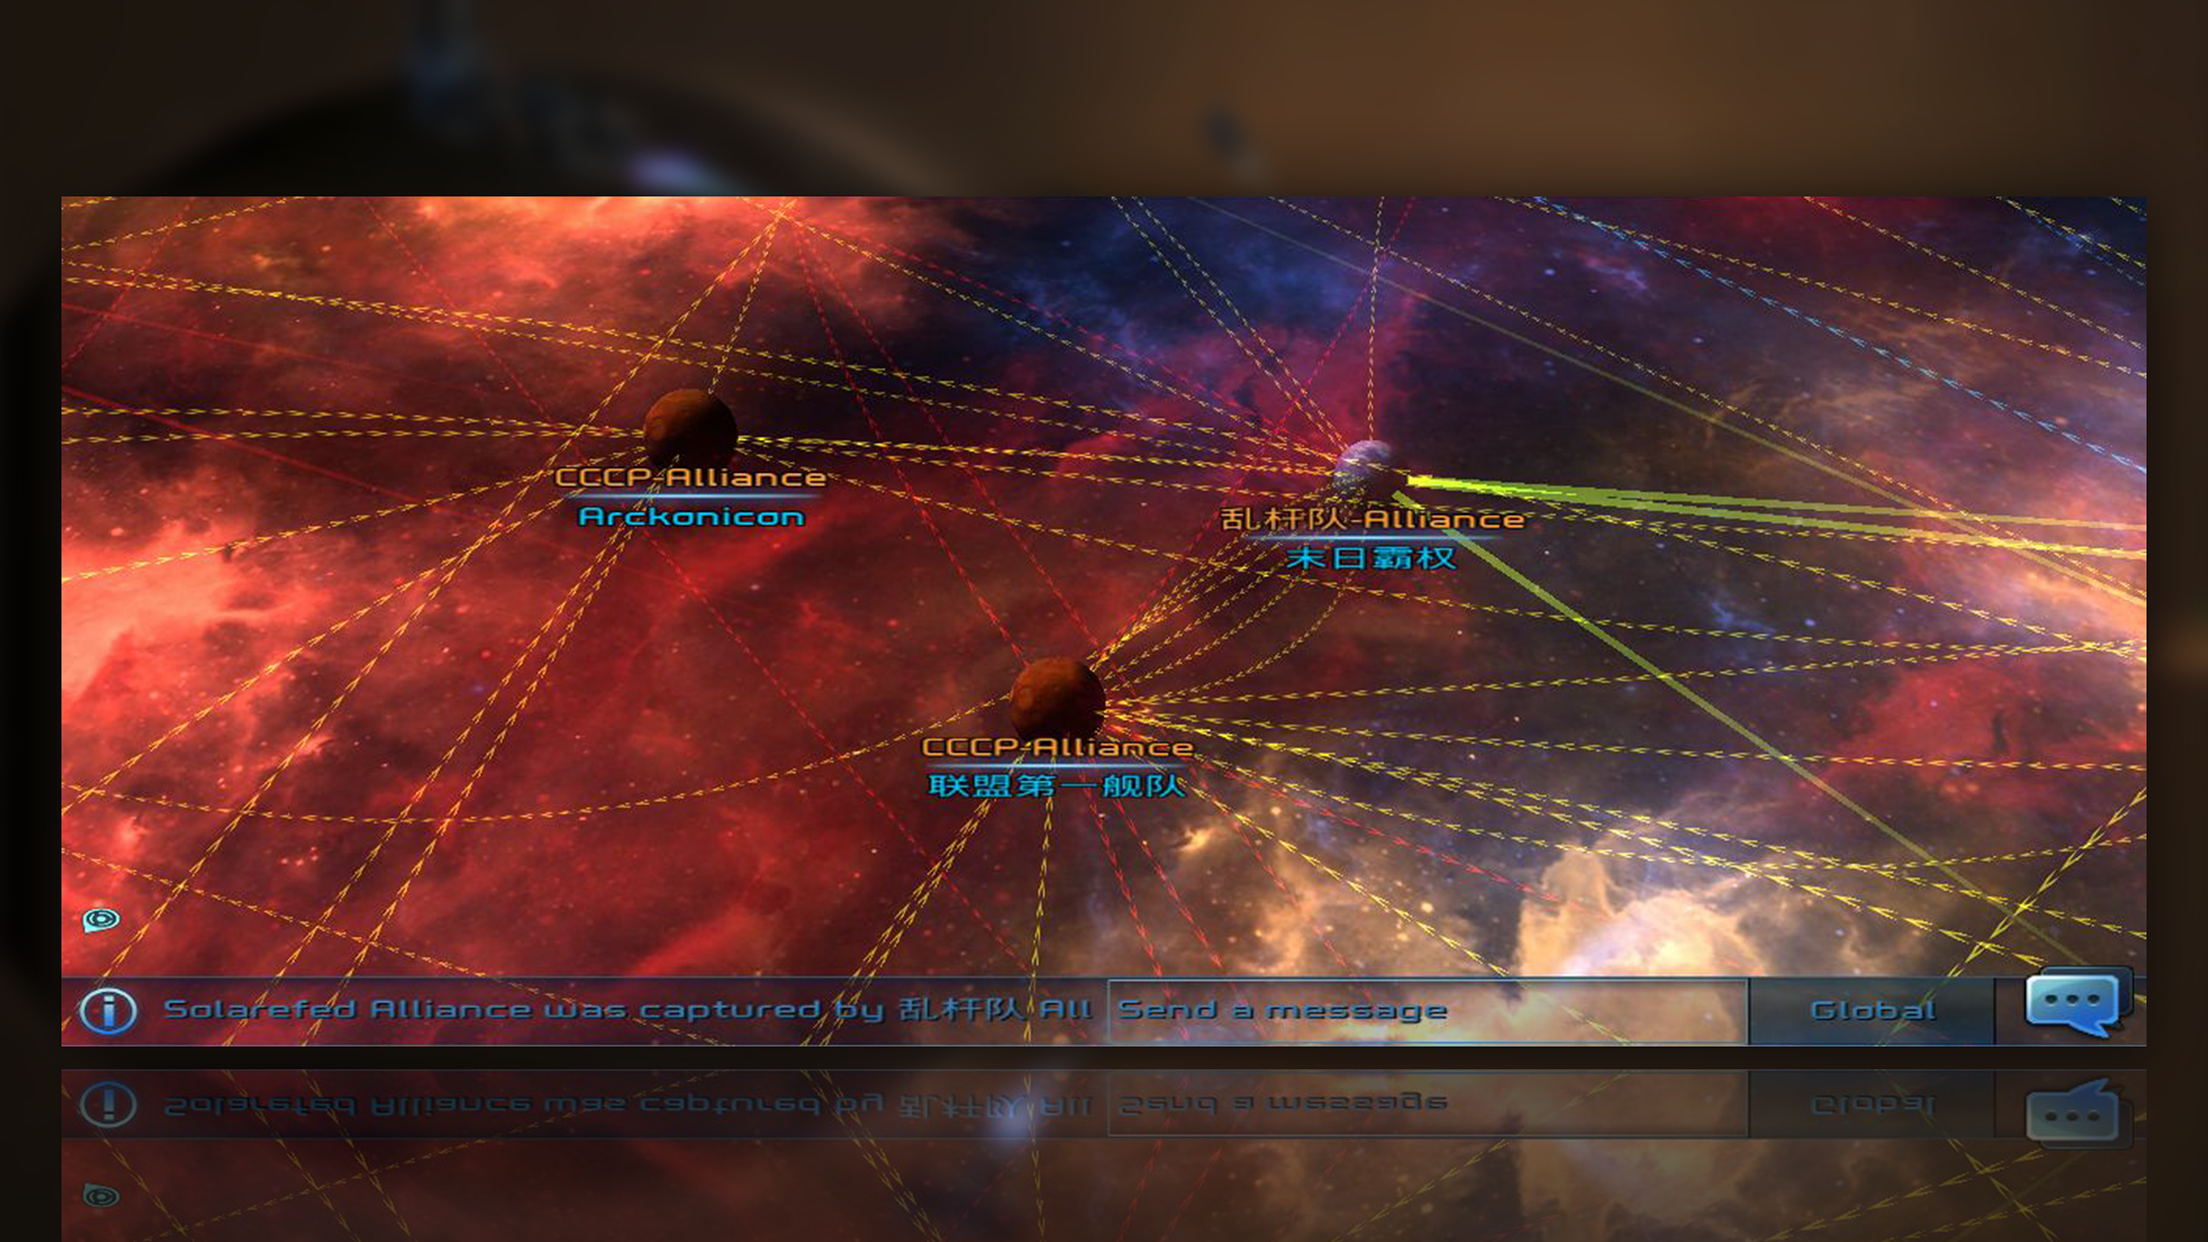 Screenshot of Armage：3D Galaxy strategy game